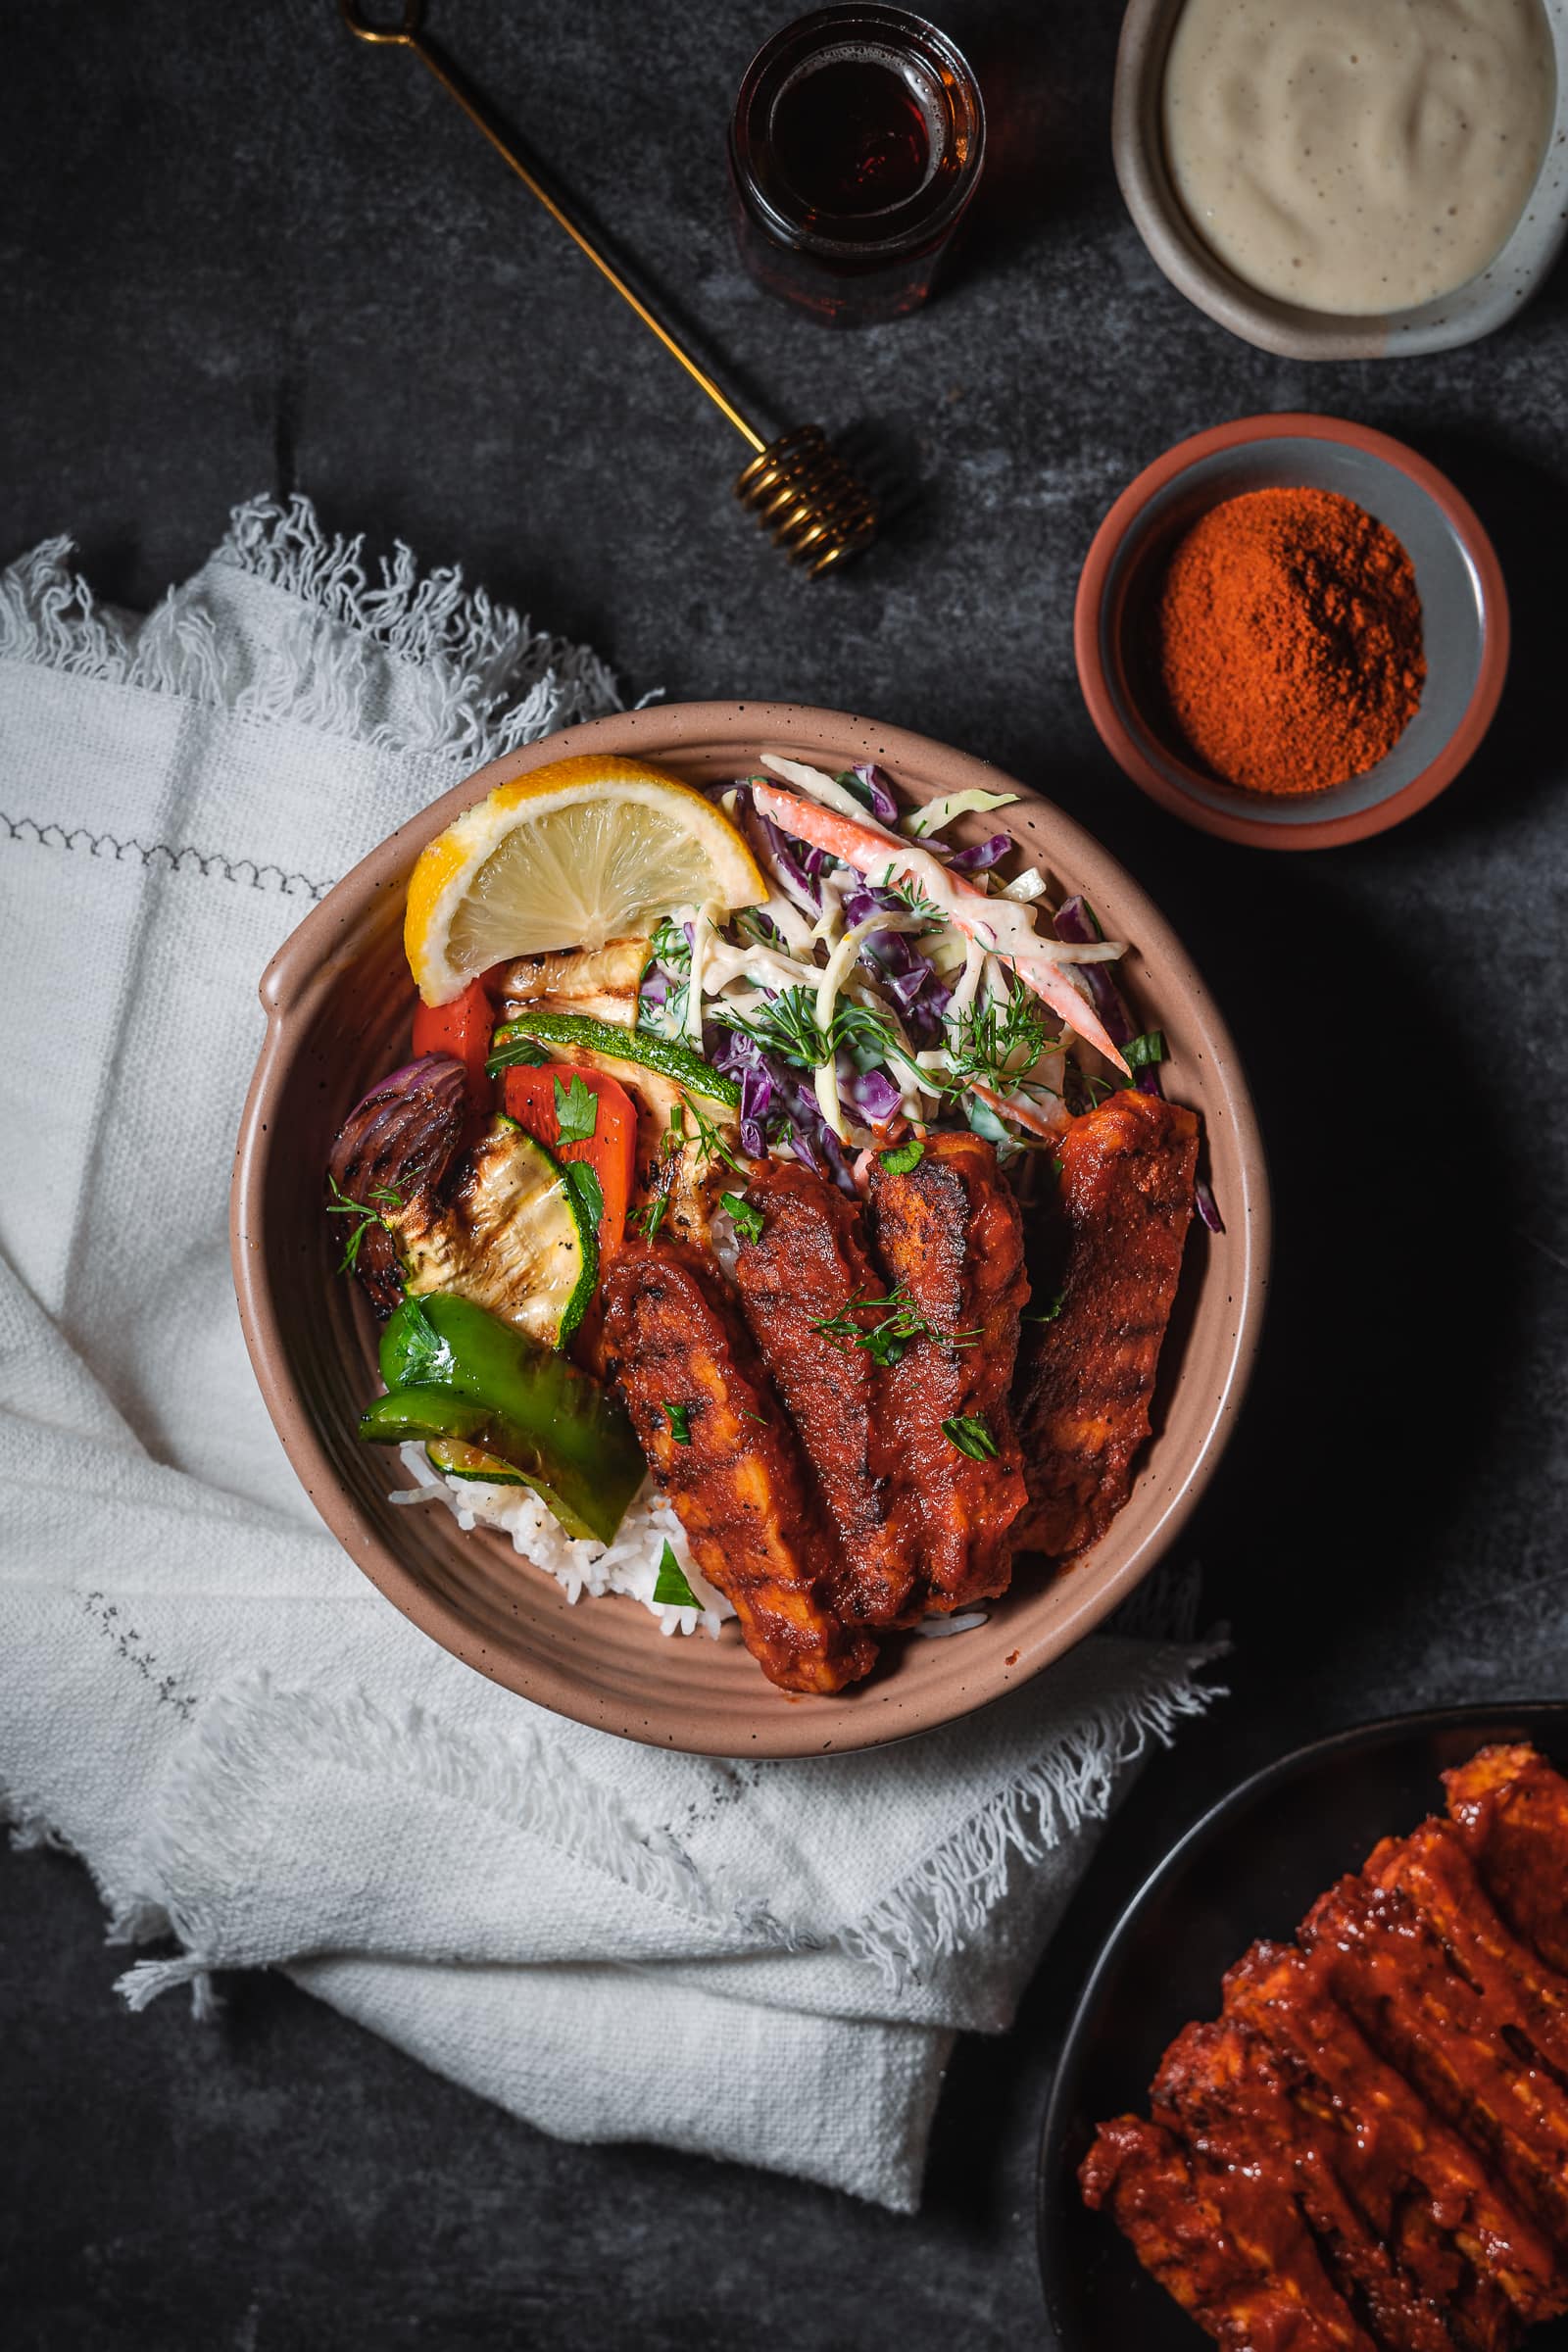 bbq tempeh served with grilled veggies and slaw.